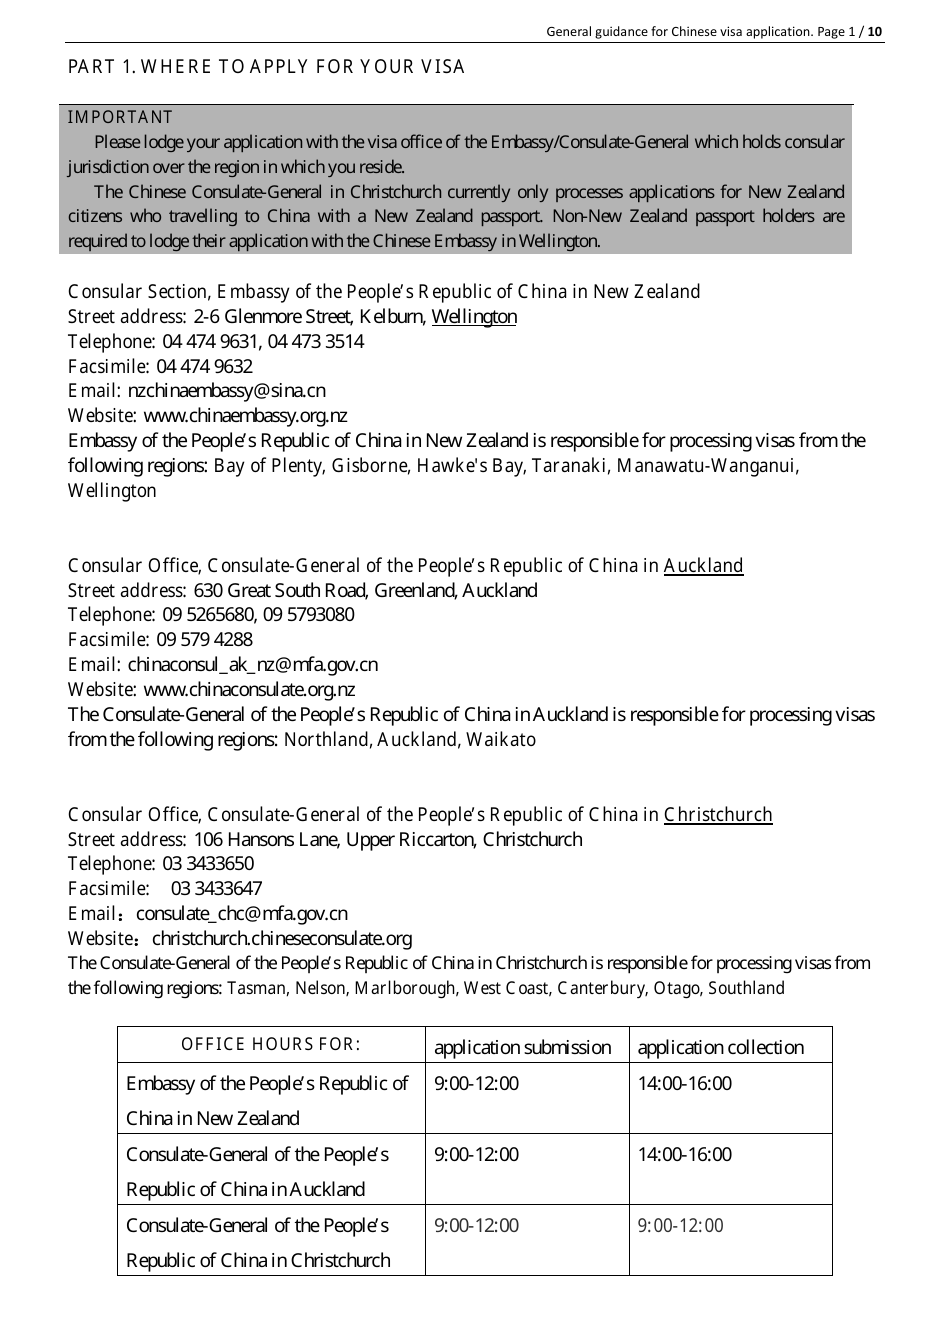 Form V2013 Chinese Visa Application Form - Embassy of the Peoples Republic of China - Wellington, New Zealand, Page 1